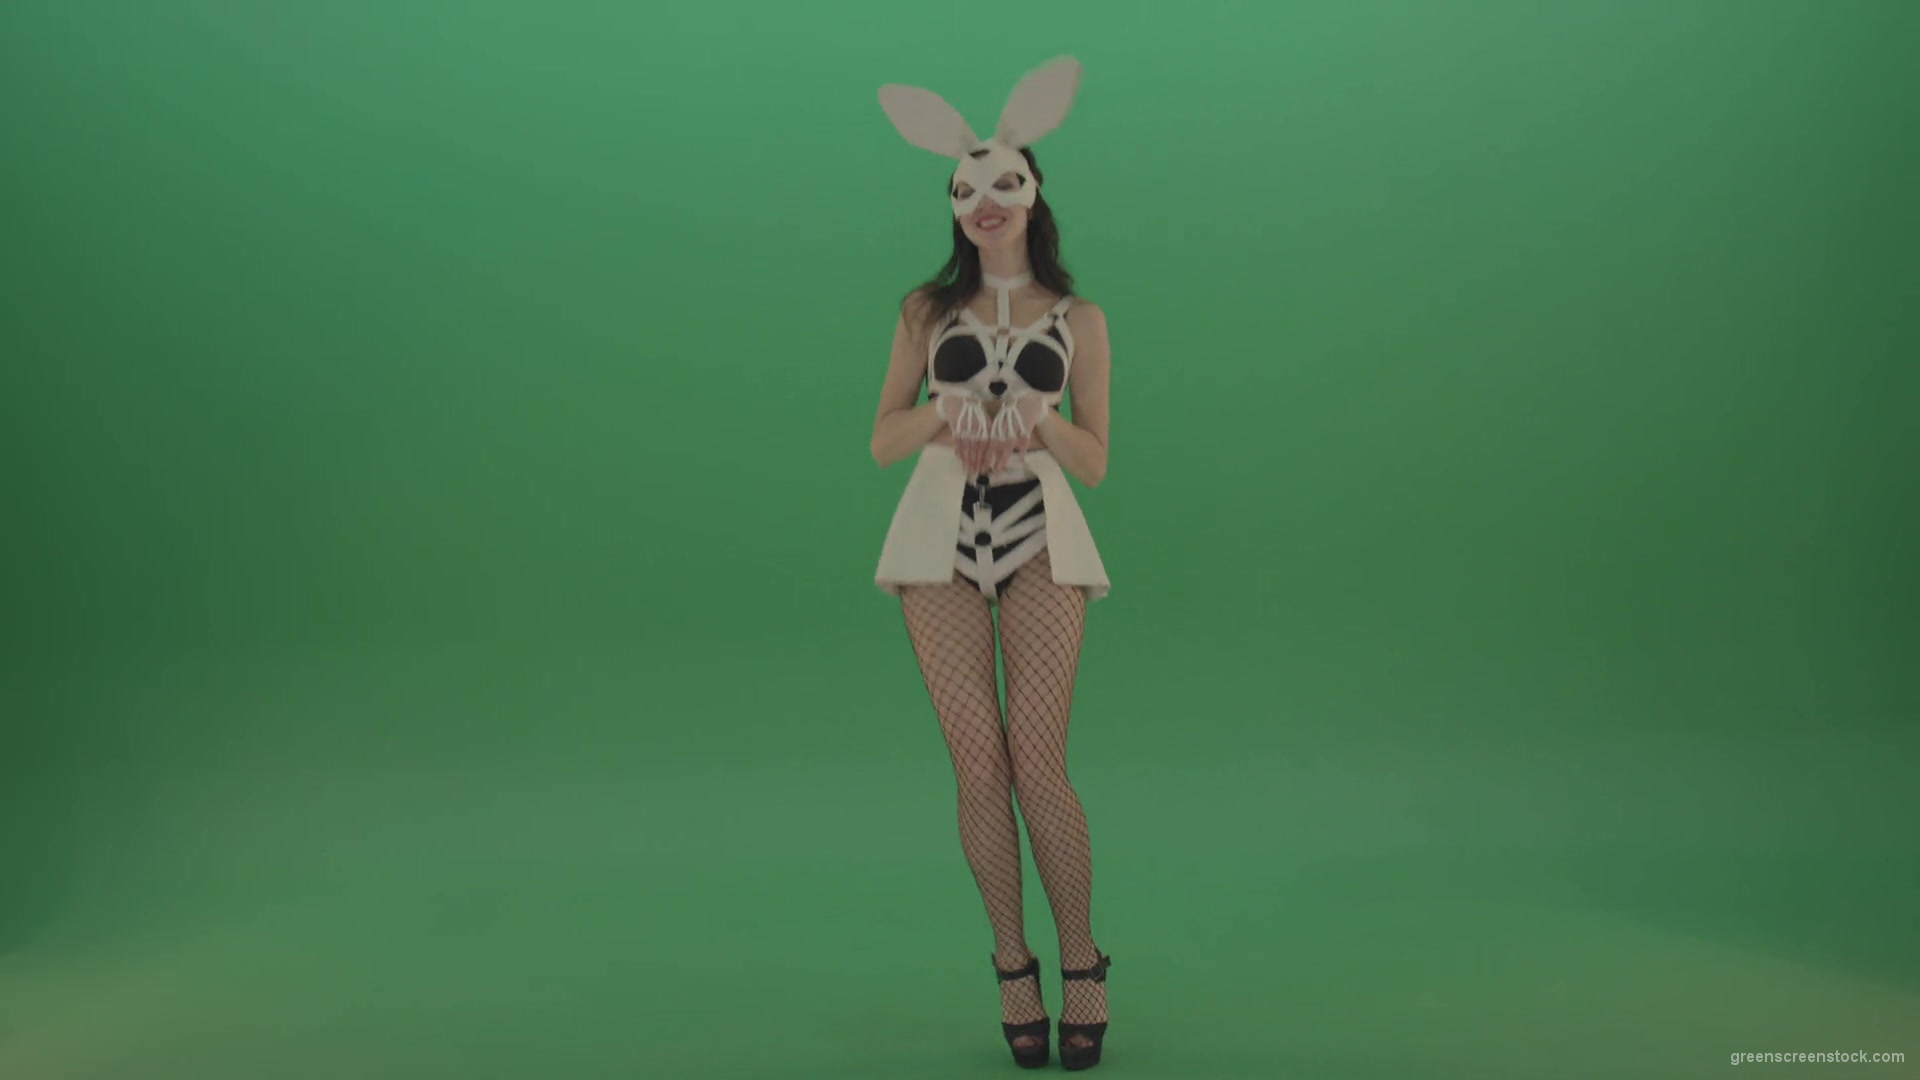 Happy-girl-dressed-in-rabbit-costume-for-adults-cyclically-jumping-in-different-directions-with-white-ears-on-chromakey-background-1920_009 Green Screen Stock